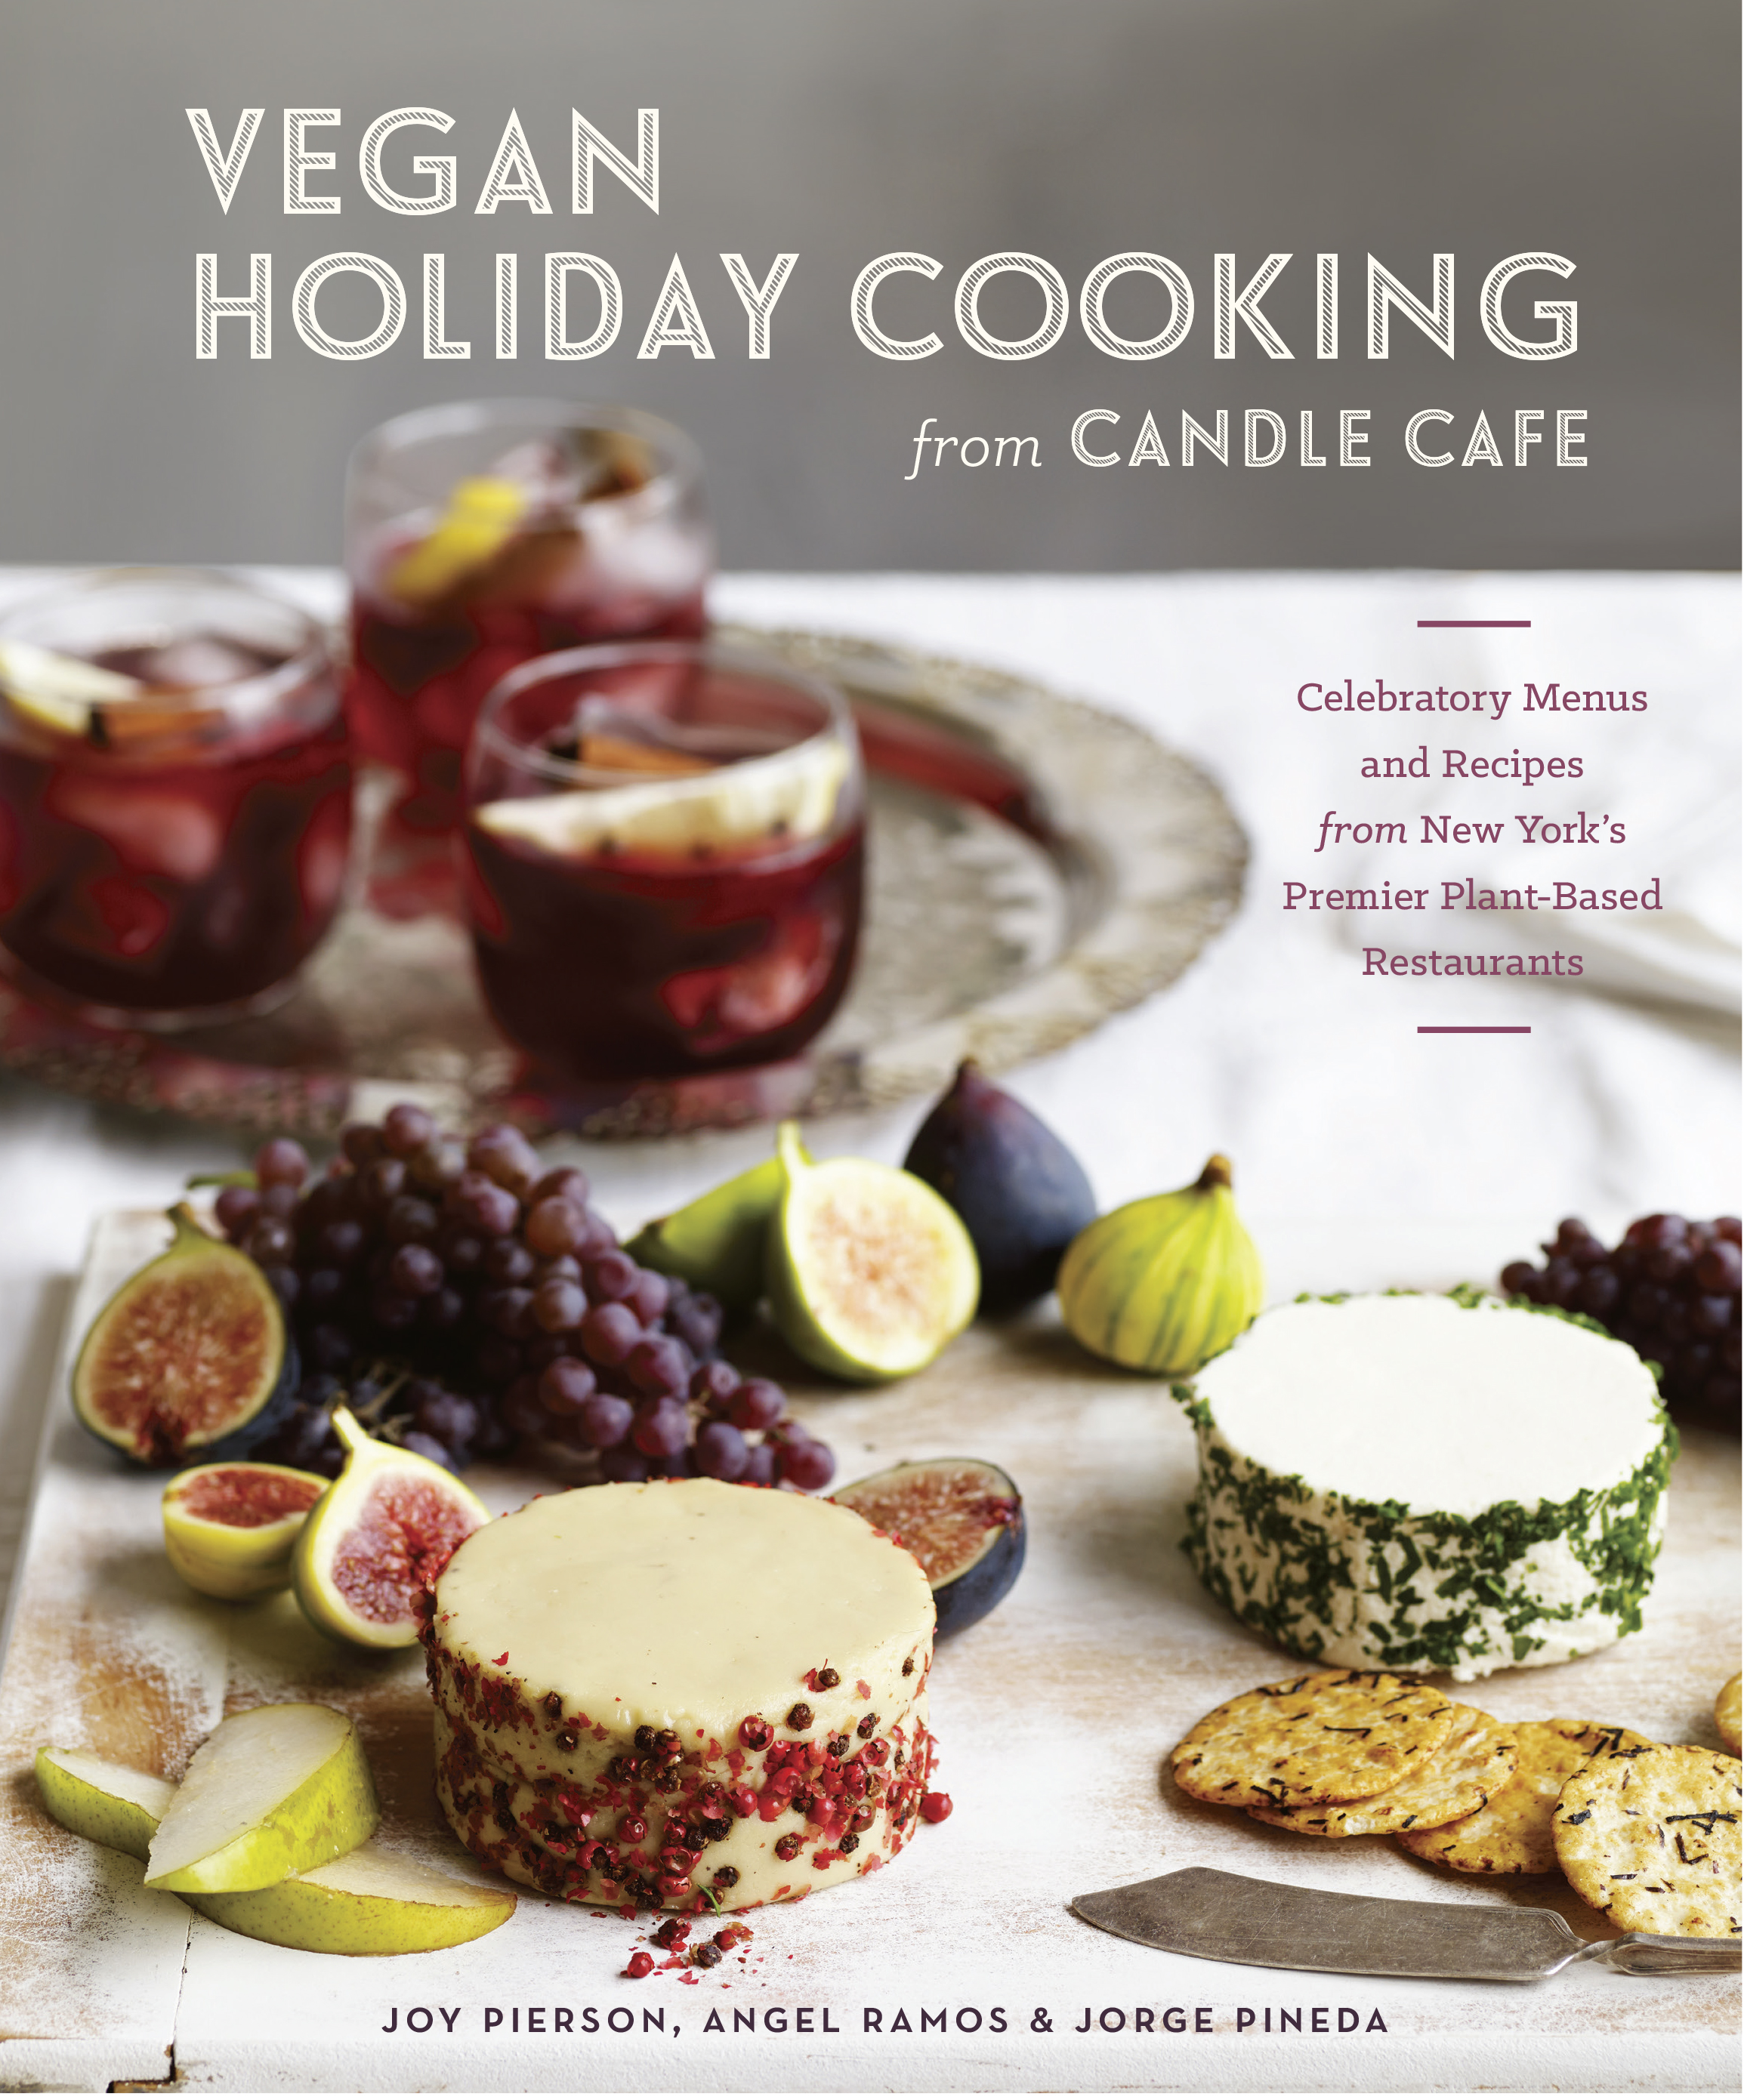 Book Launch: Vegan Holiday Cooking from Candle Cafe by Joy Pierson, Angel Ramos, and Jorge Pineda